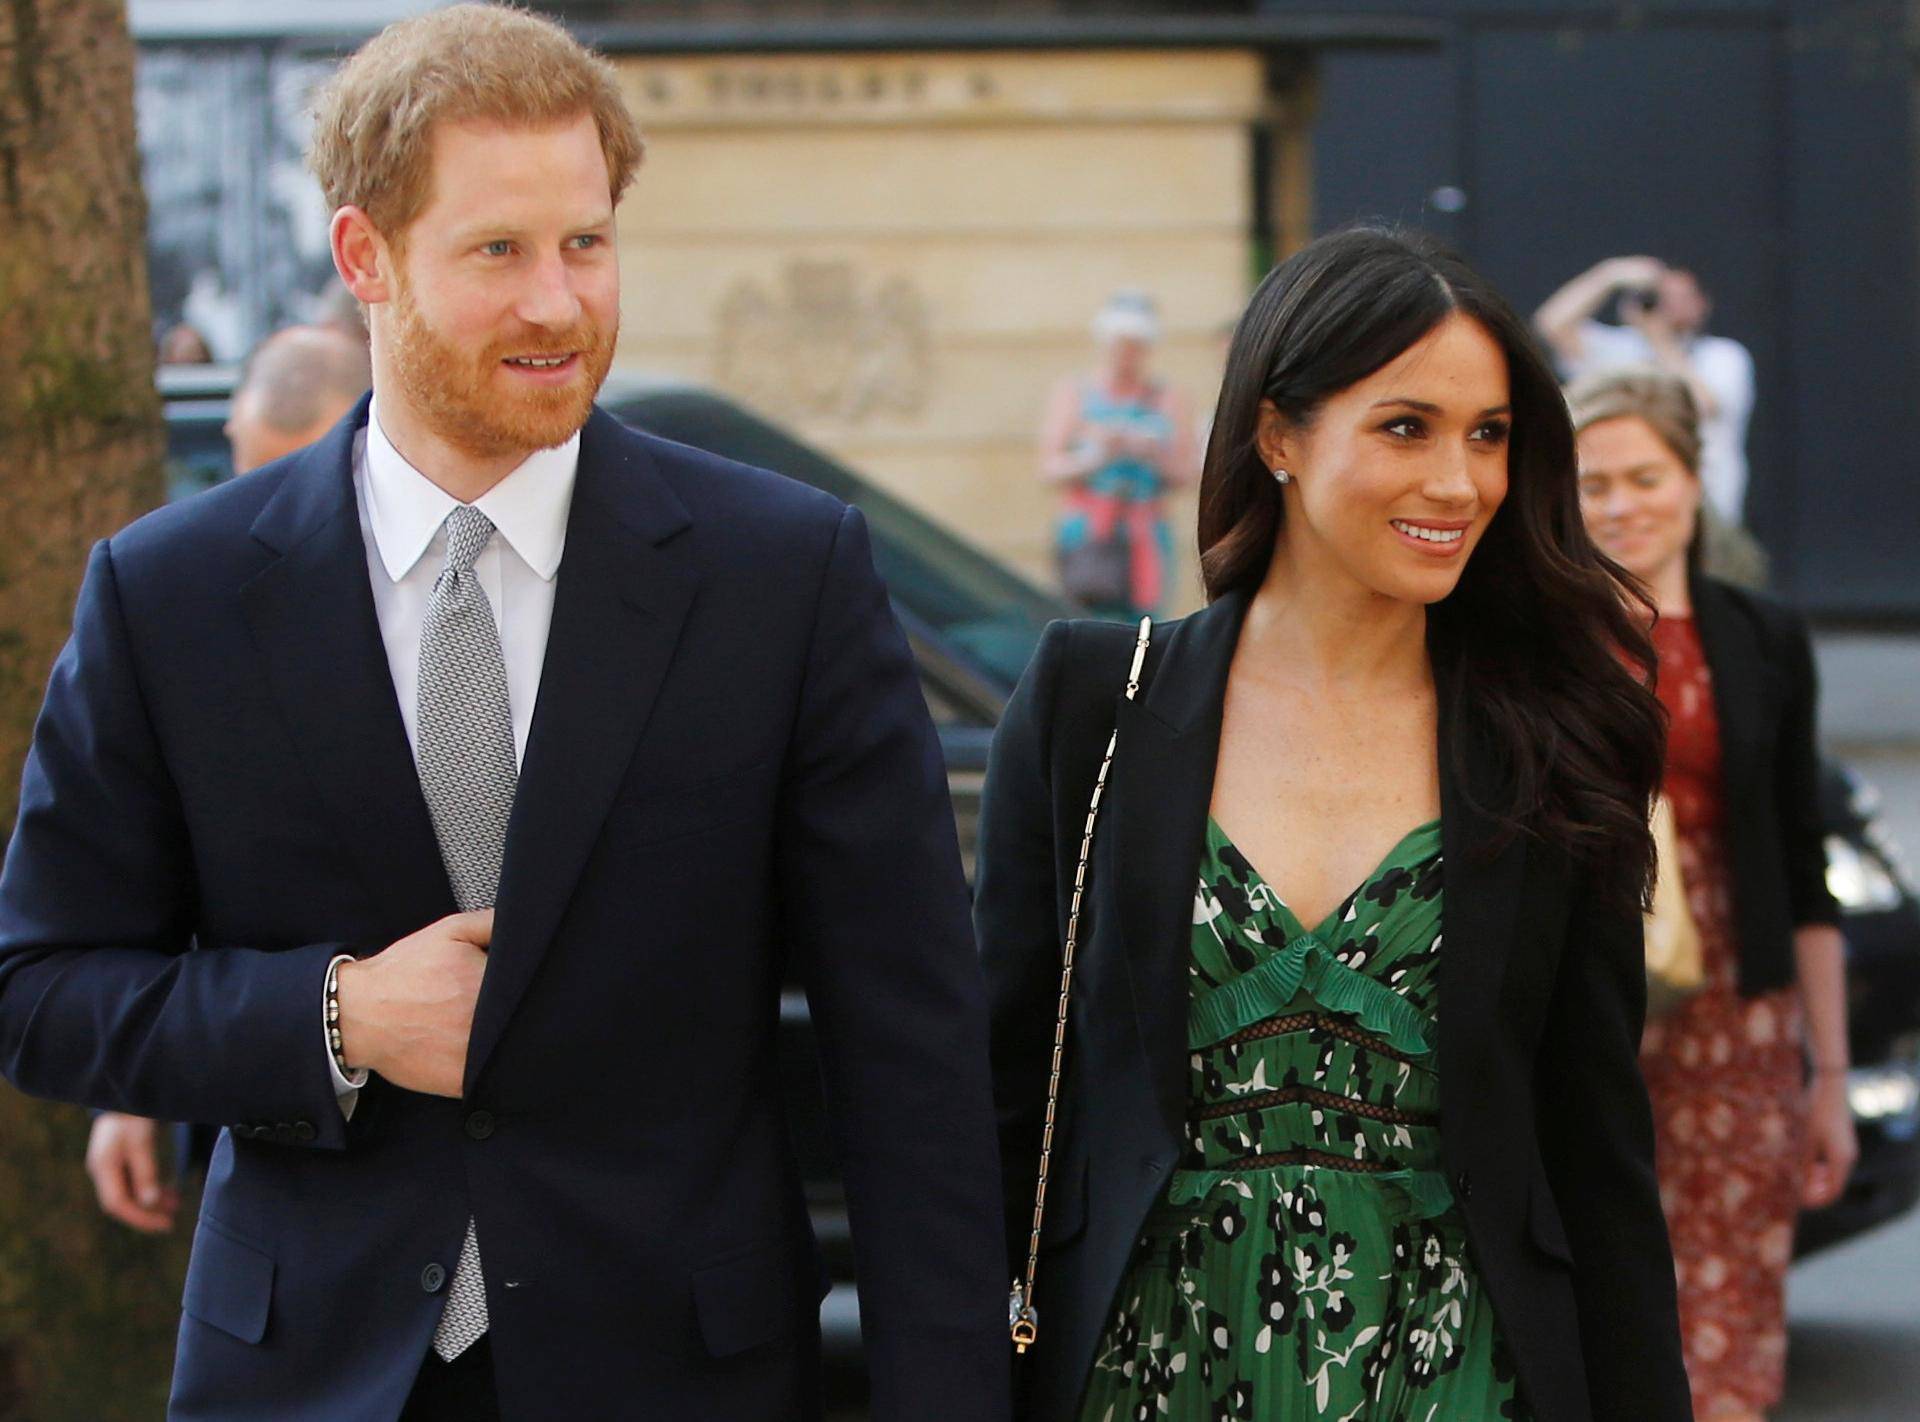 Britain's Prince Harry and Meghan Markle arrive to attend a reception celebrating the forthcoming Invictus Games Sydney 2018, hosted by Malcolm Turnbull, Prime Minister of Australia, and his wife Lucy Turnbull, at Australia House in London